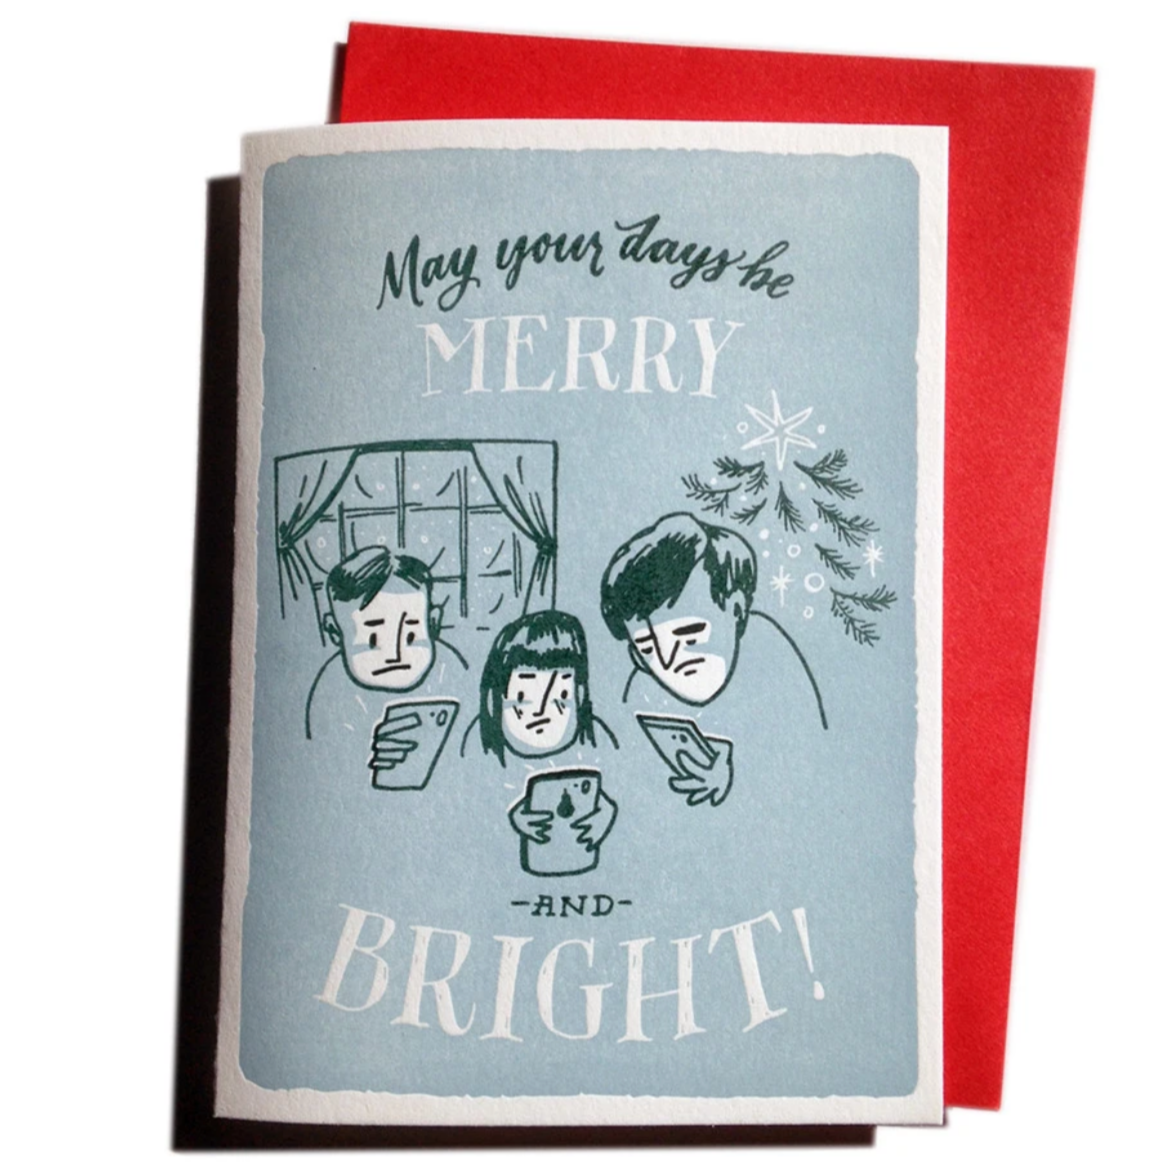 three people huddled in front of their phone screens on card saying "may your days be Merry and Bright! red envelope